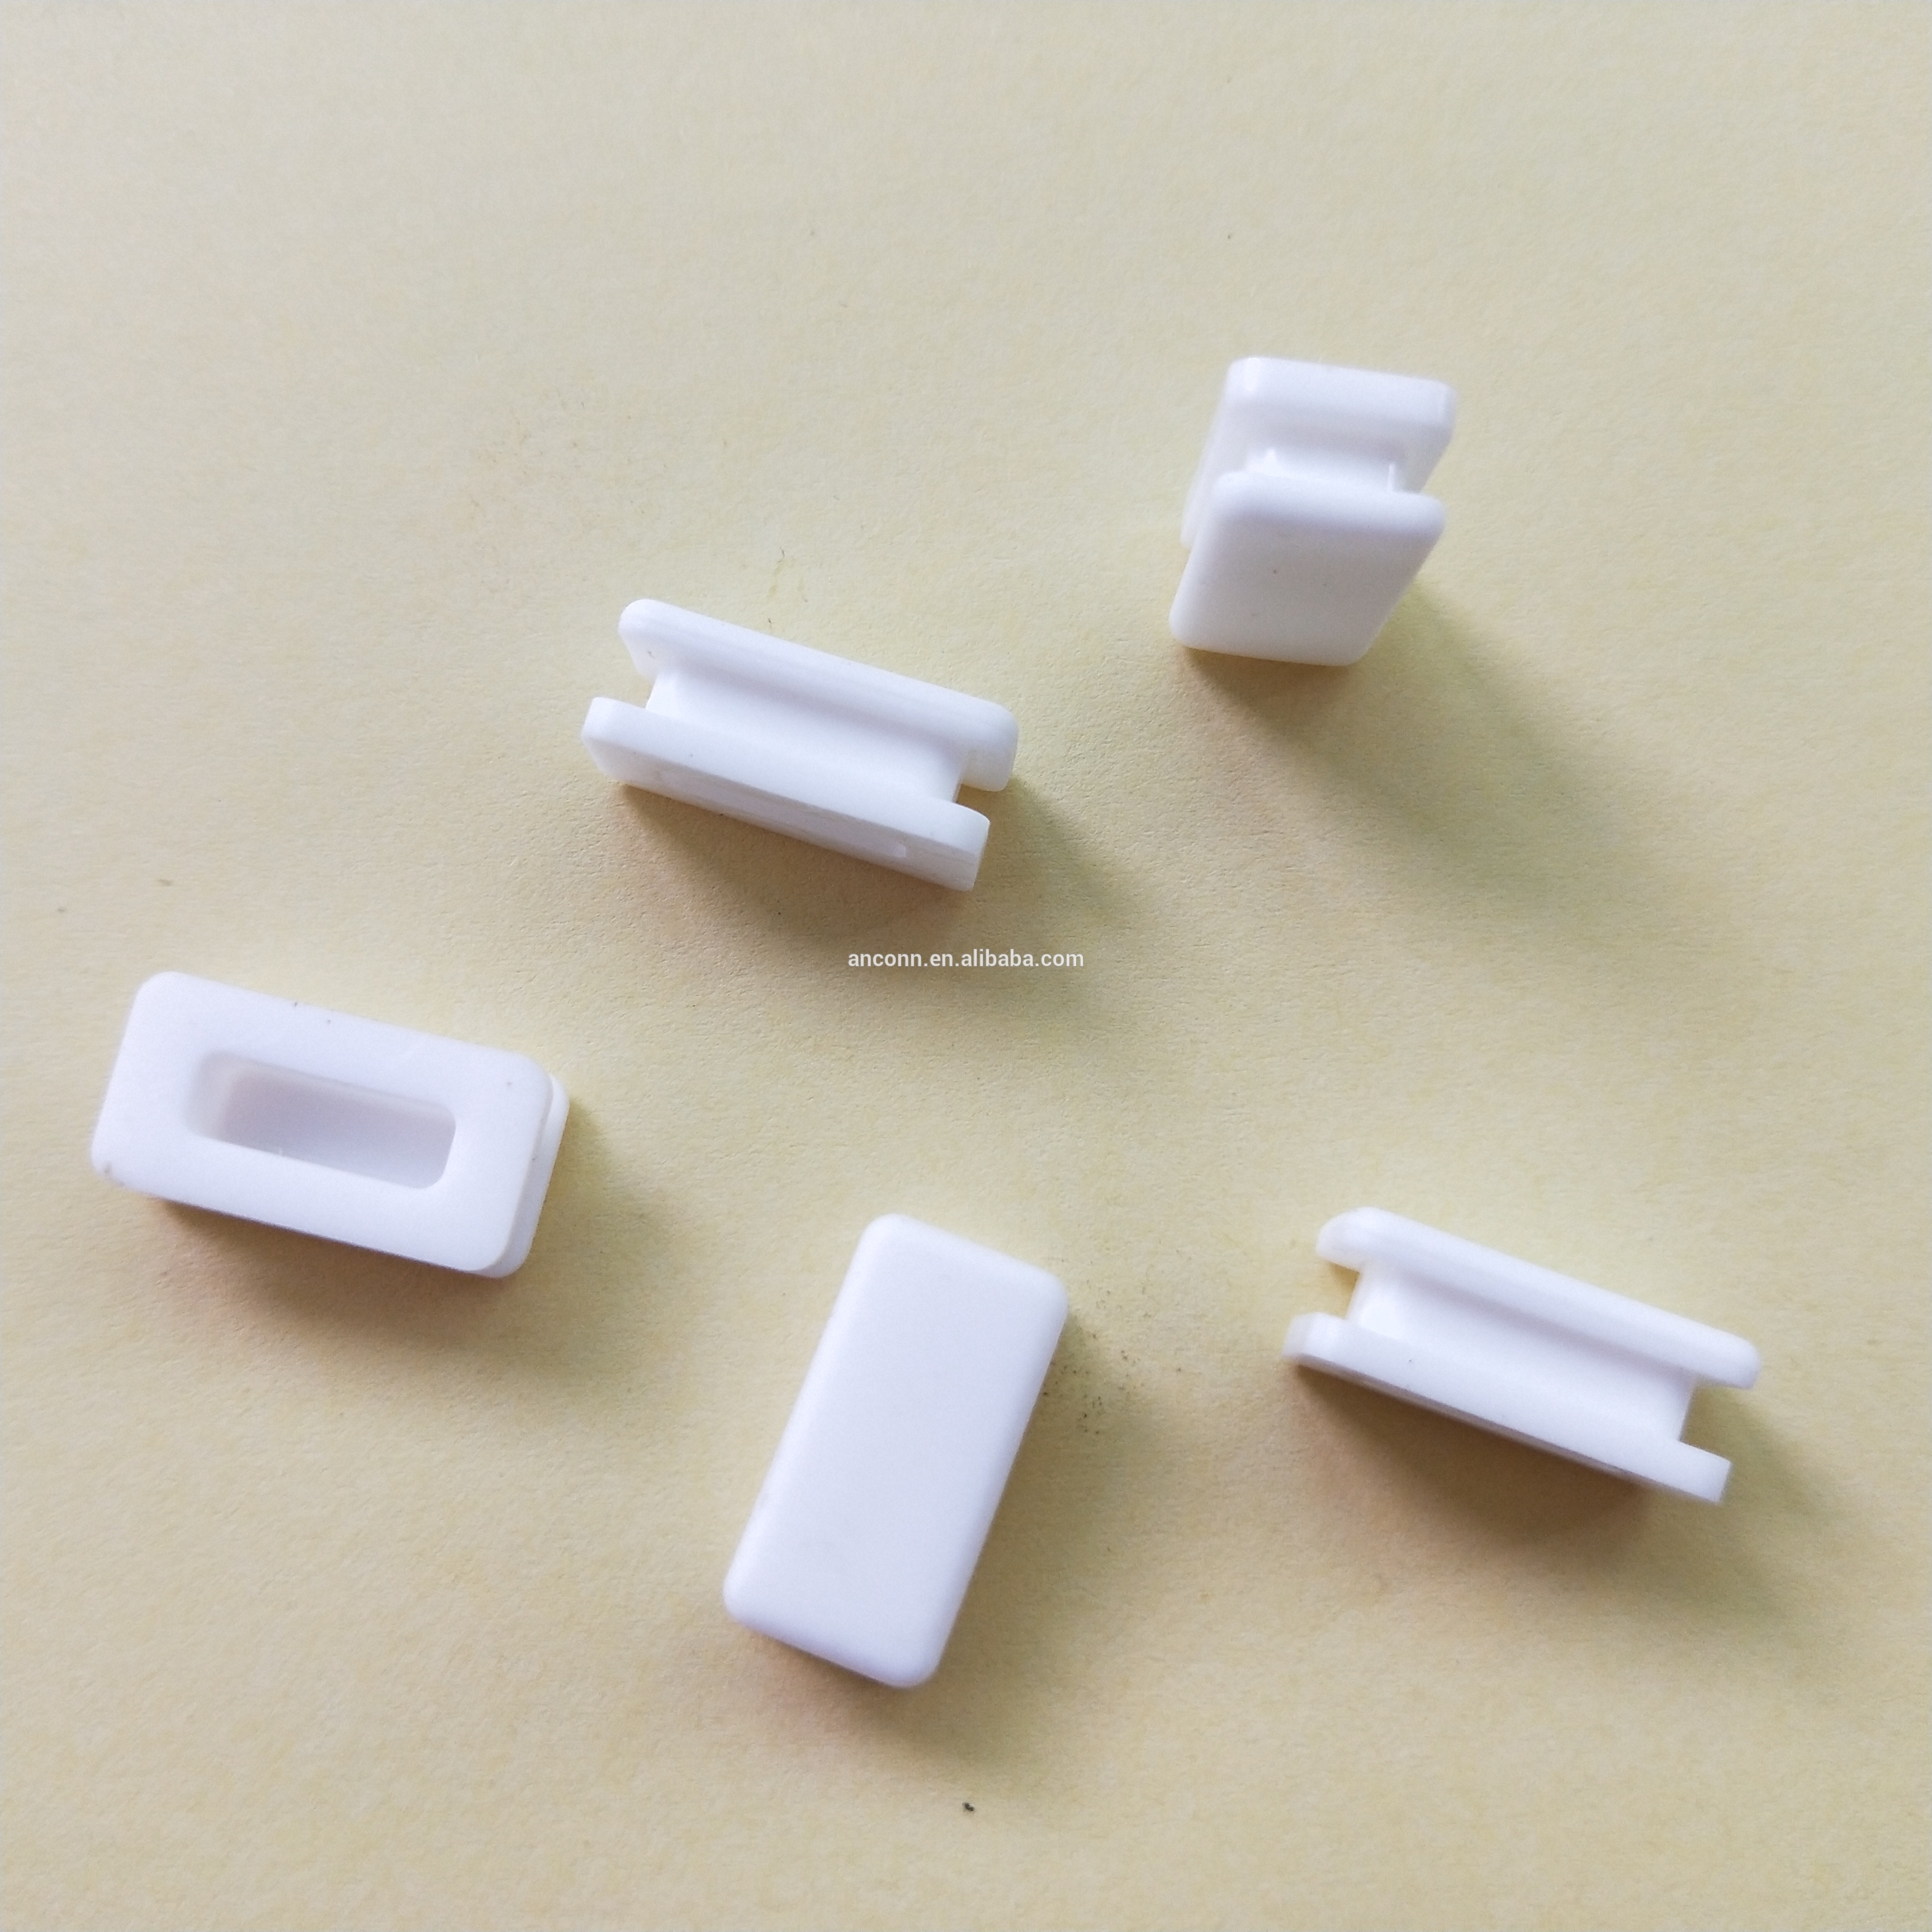 White Micro USB Silicone Plug with Grooves for Thermal imagers and accessories